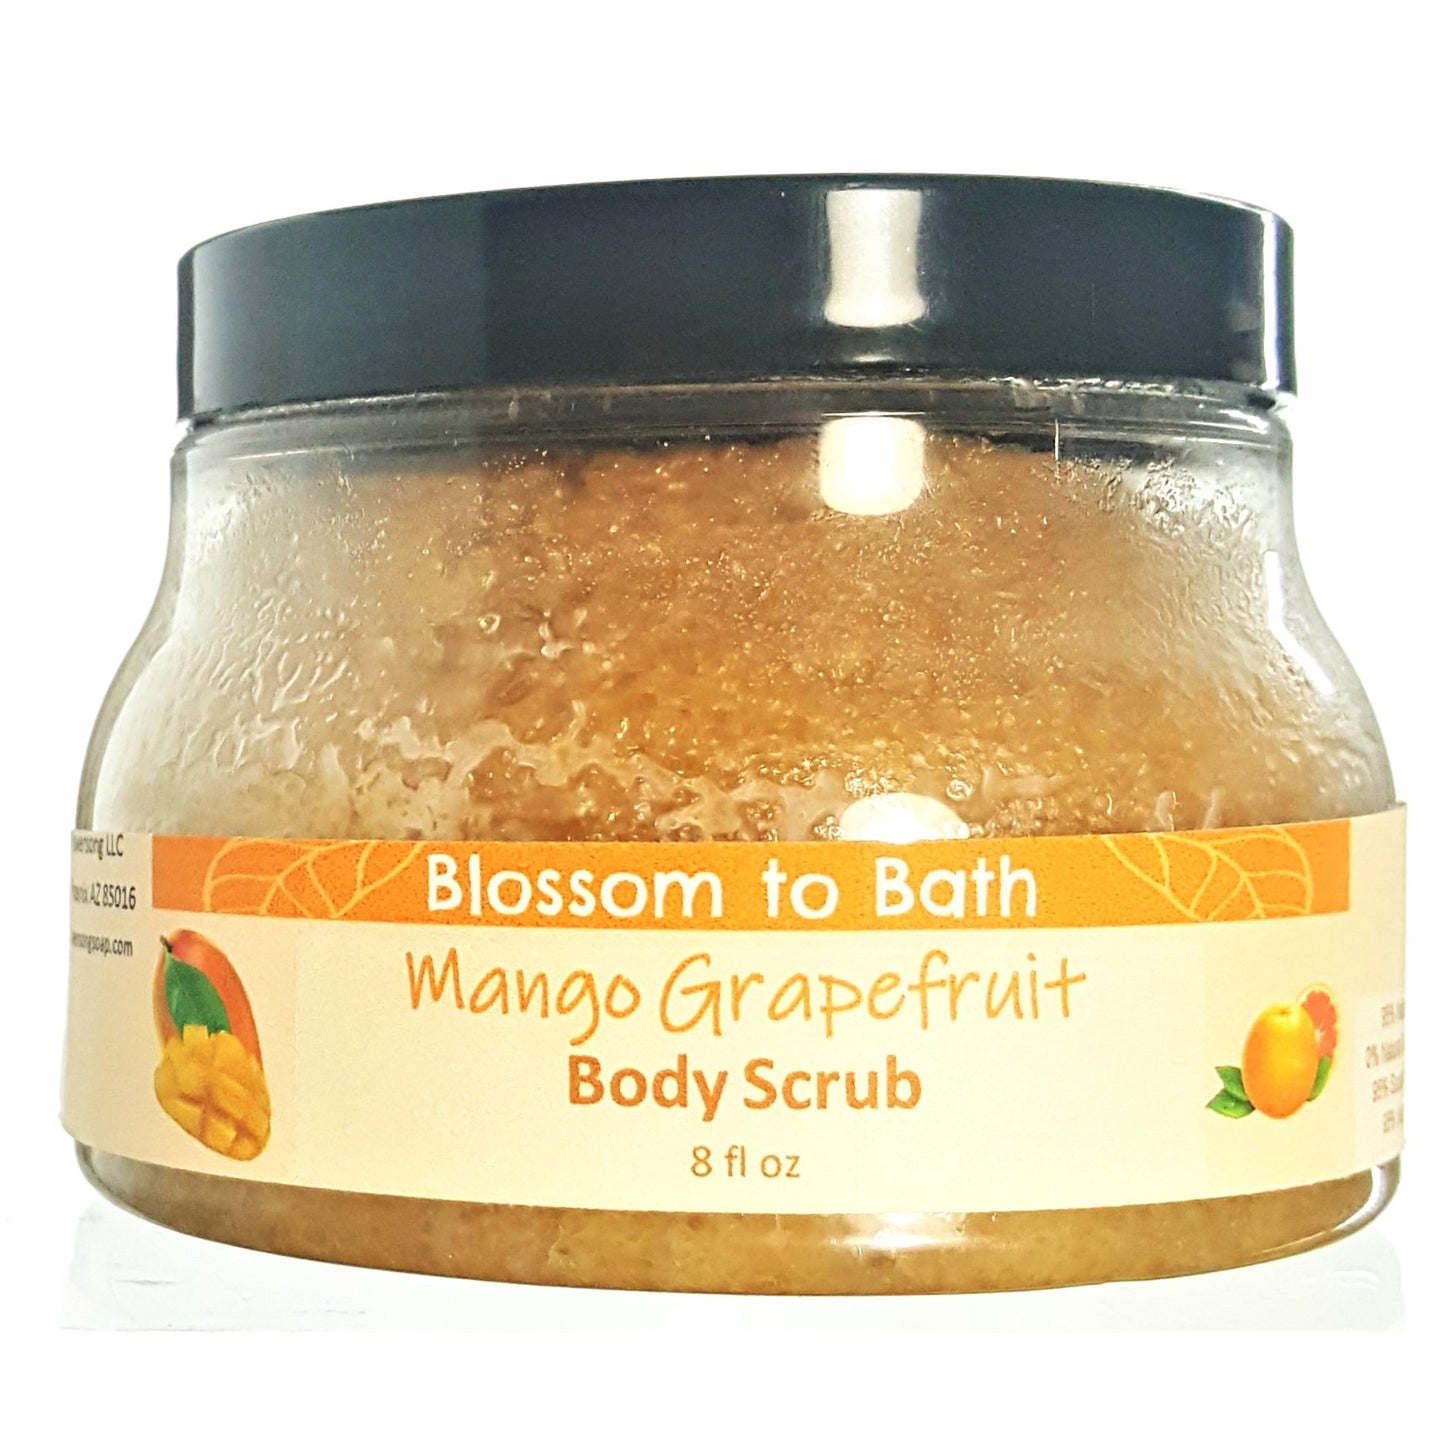 Buy Blossom to Bath Mango Grapefruit Body Scrub from Flowersong Soap Studio.  Large crystal turbinado sugar plus luxury rich oils conveniently exfoliate and moisturize in one step  Exotic tropical fruits in a powdery puff of sophisticated freshness.